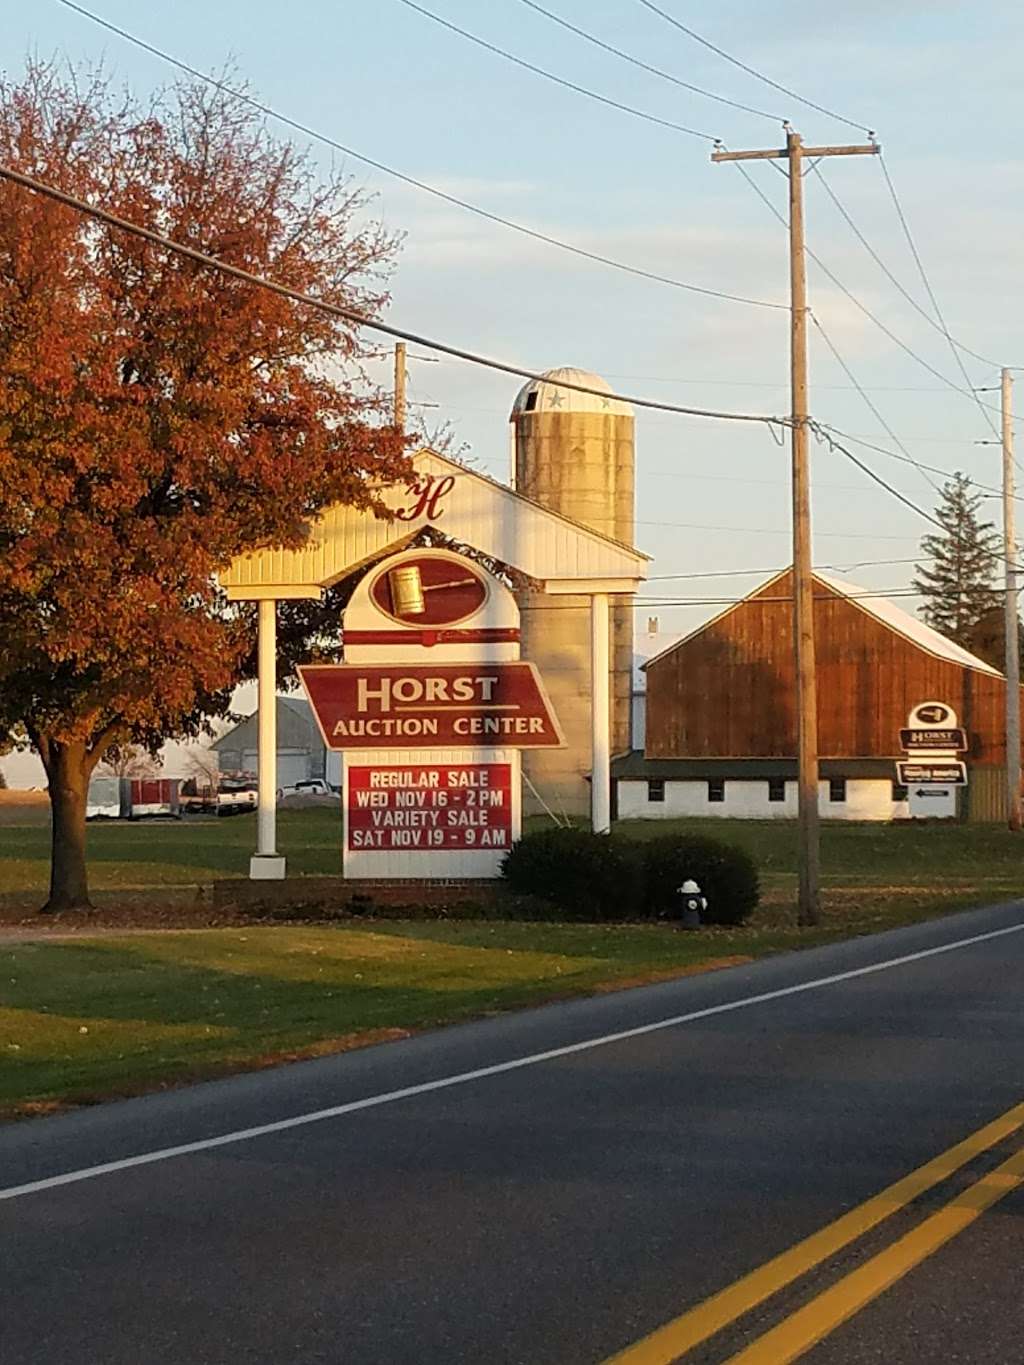 Horst Auctioneers | 50 Durlach Rd, Ephrata, PA 17522 | Phone: (717) 738-3080